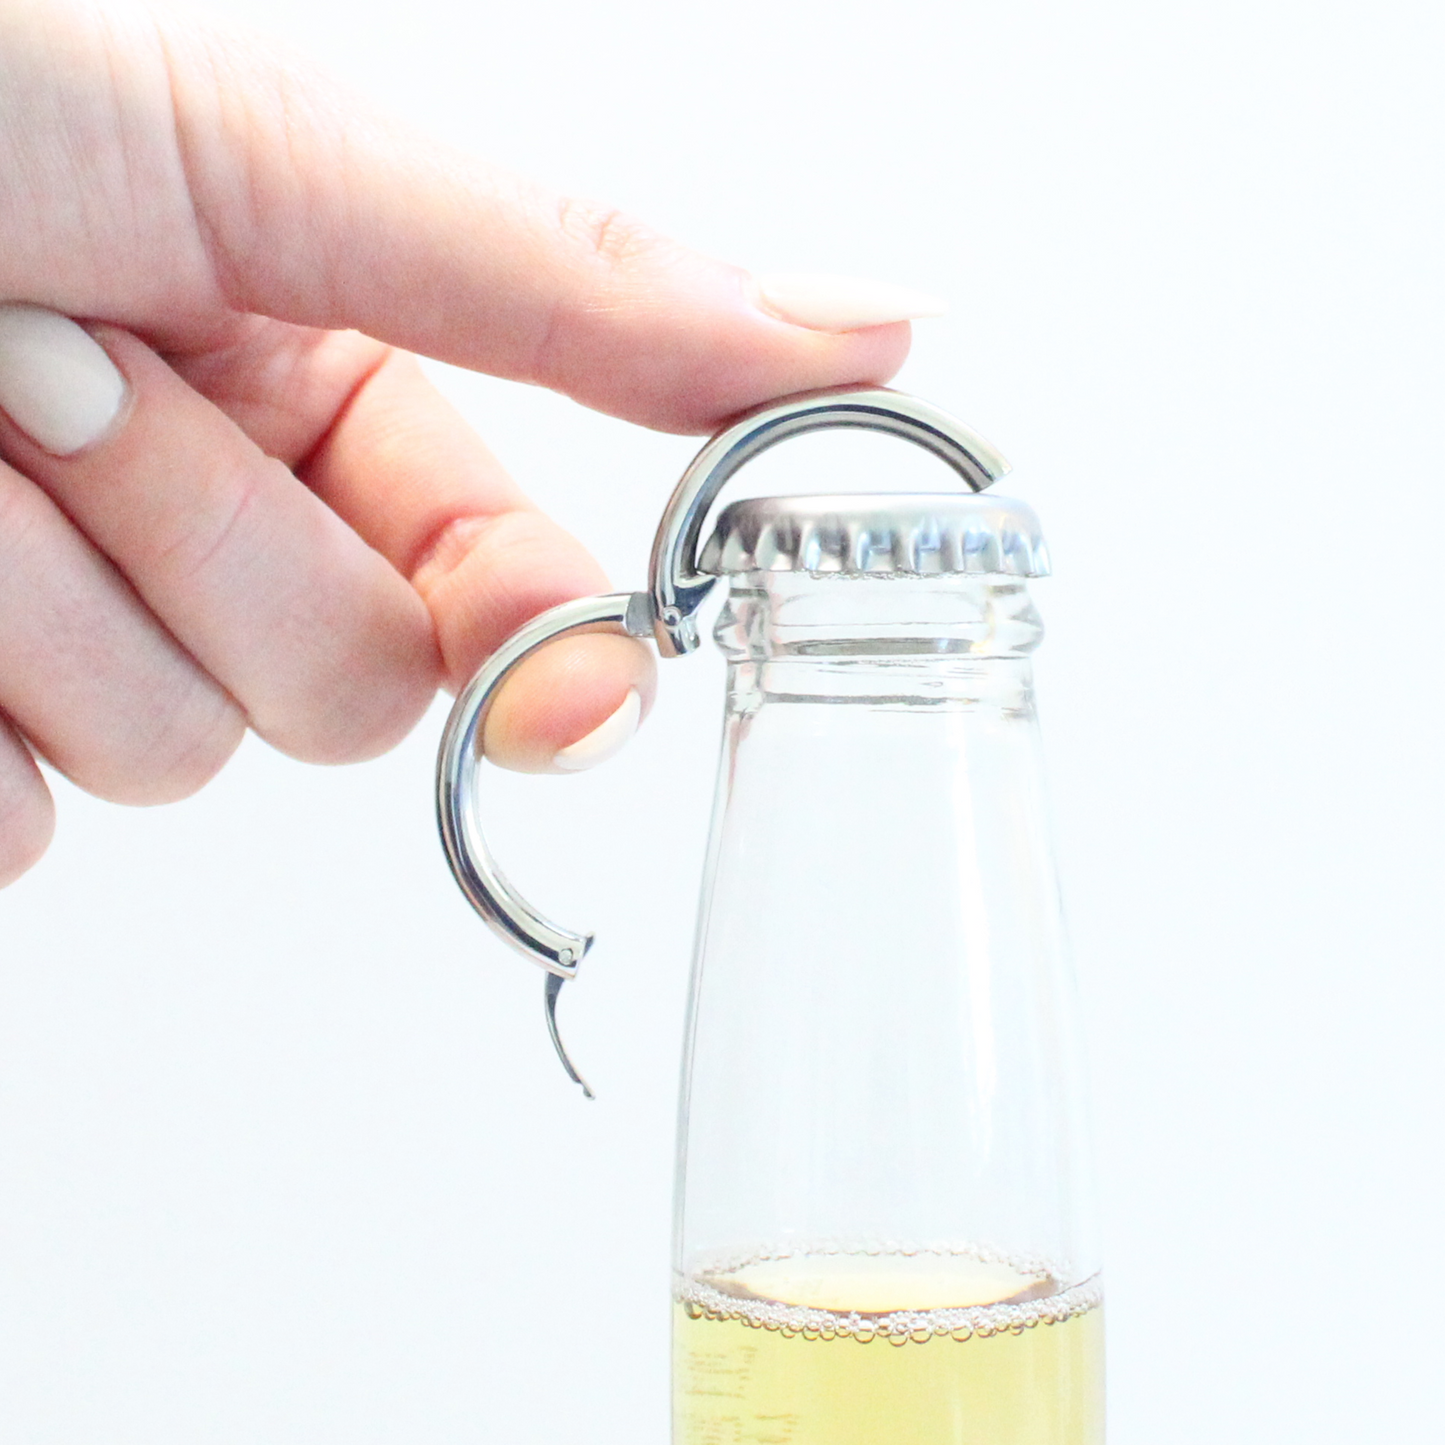 BeerRings look like regular hoop earrings upon first glance–but they double as easy-to-use bottle openers when you’re in a bind (or just want to dazzle your friends)!